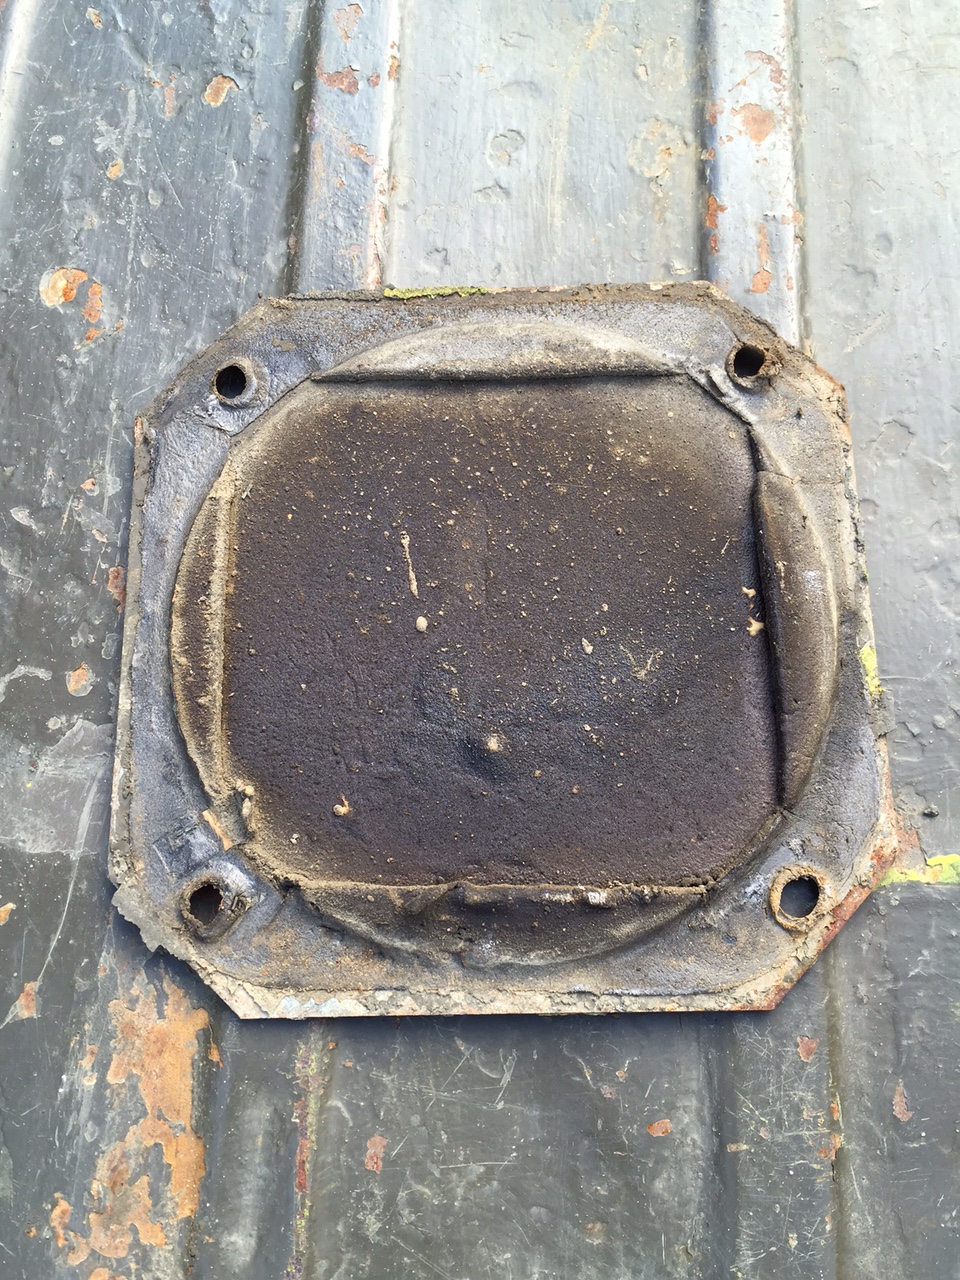 Seal on the bottom of the filler hole cover plate